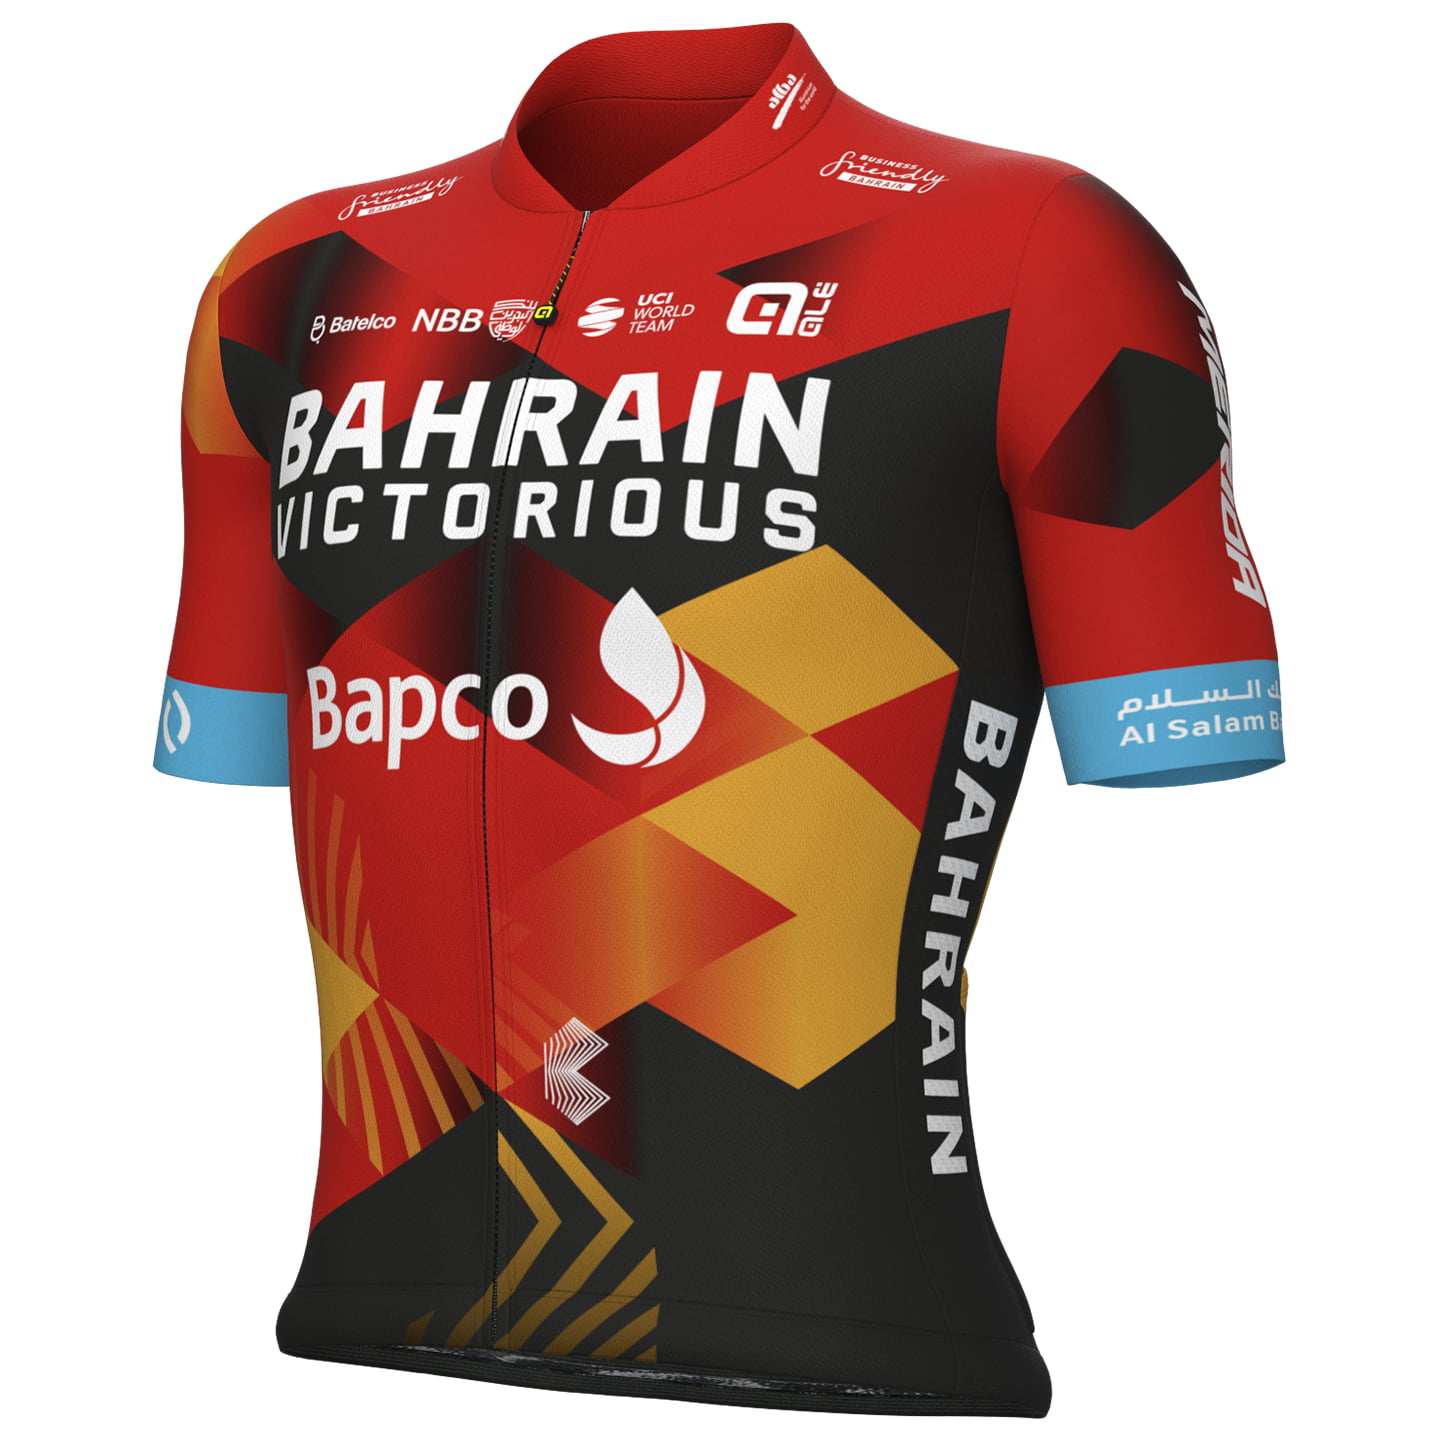 BAHRAIN - VICTORIOUS 2023 Short Sleeve Jersey, for men, size S, Cycling jersey, Cycling clothing